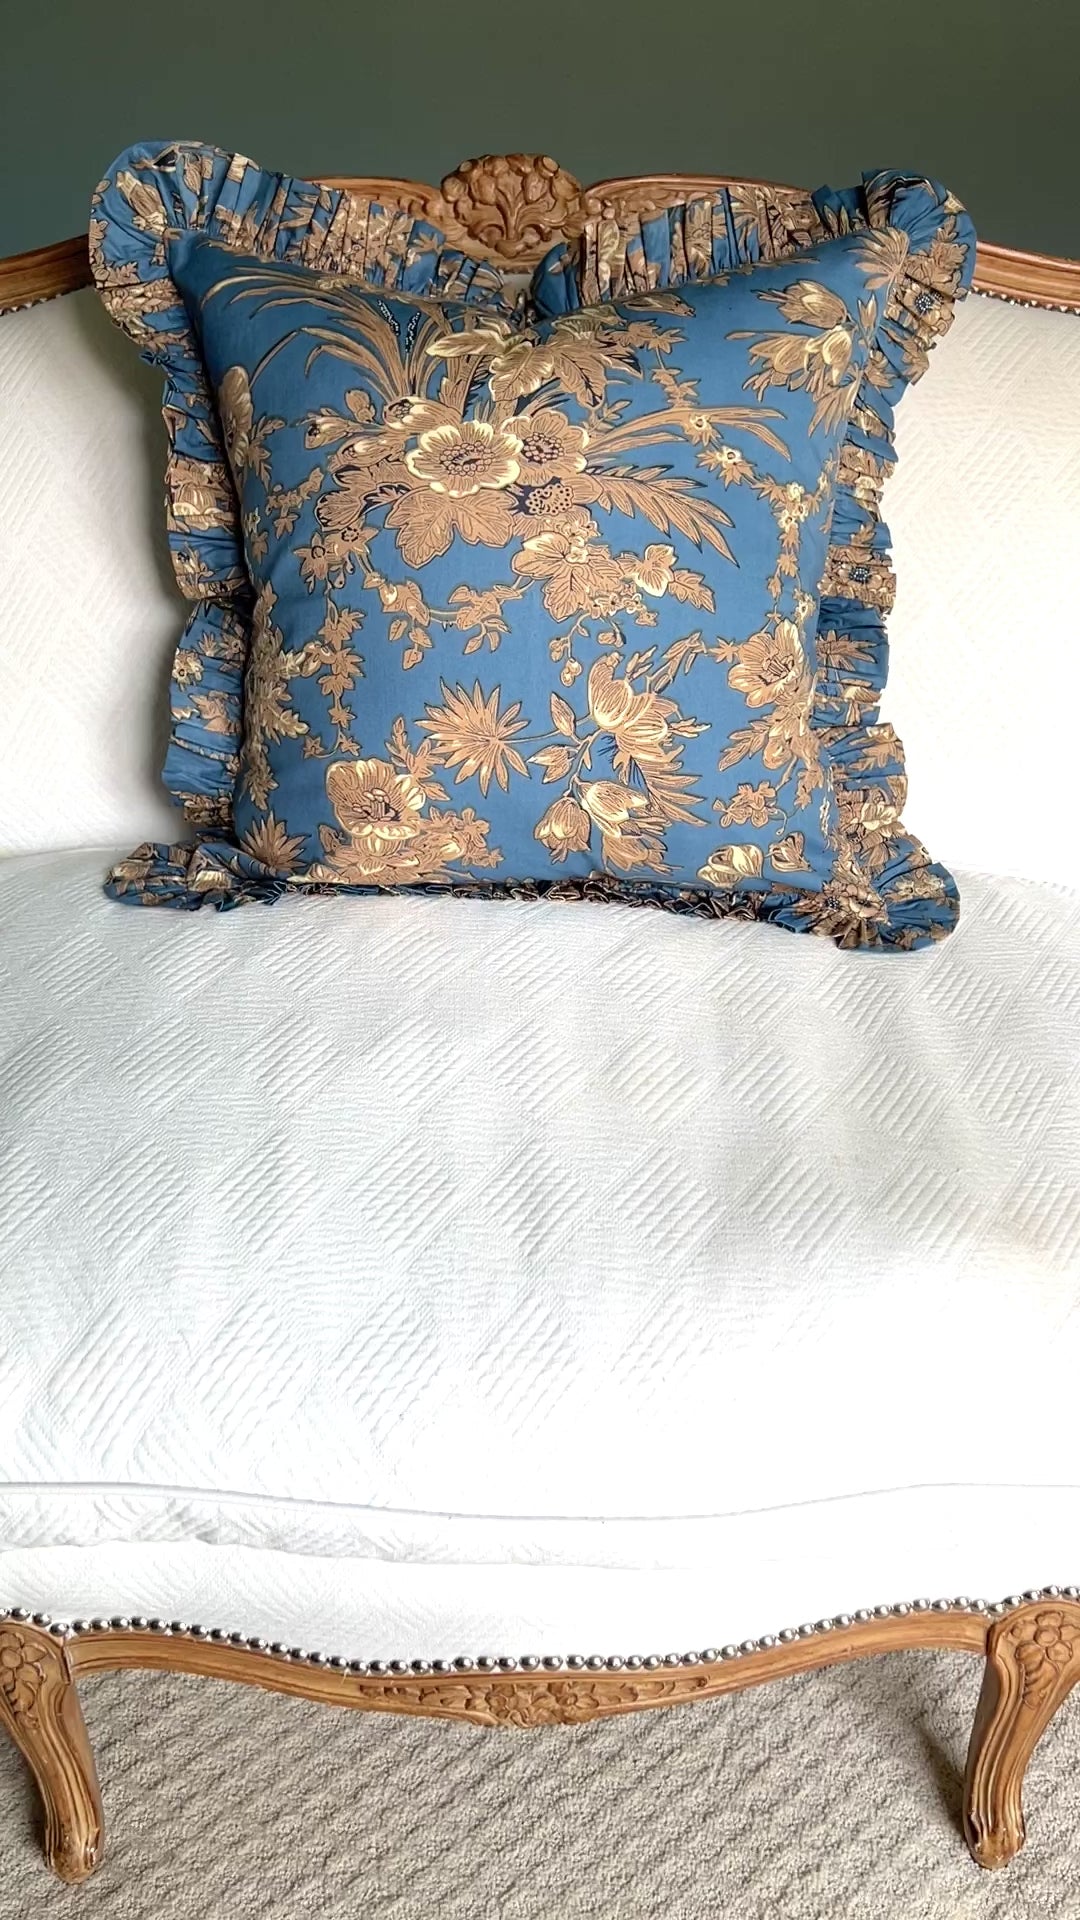 Blue floral toile pillow cover with ruffle trim